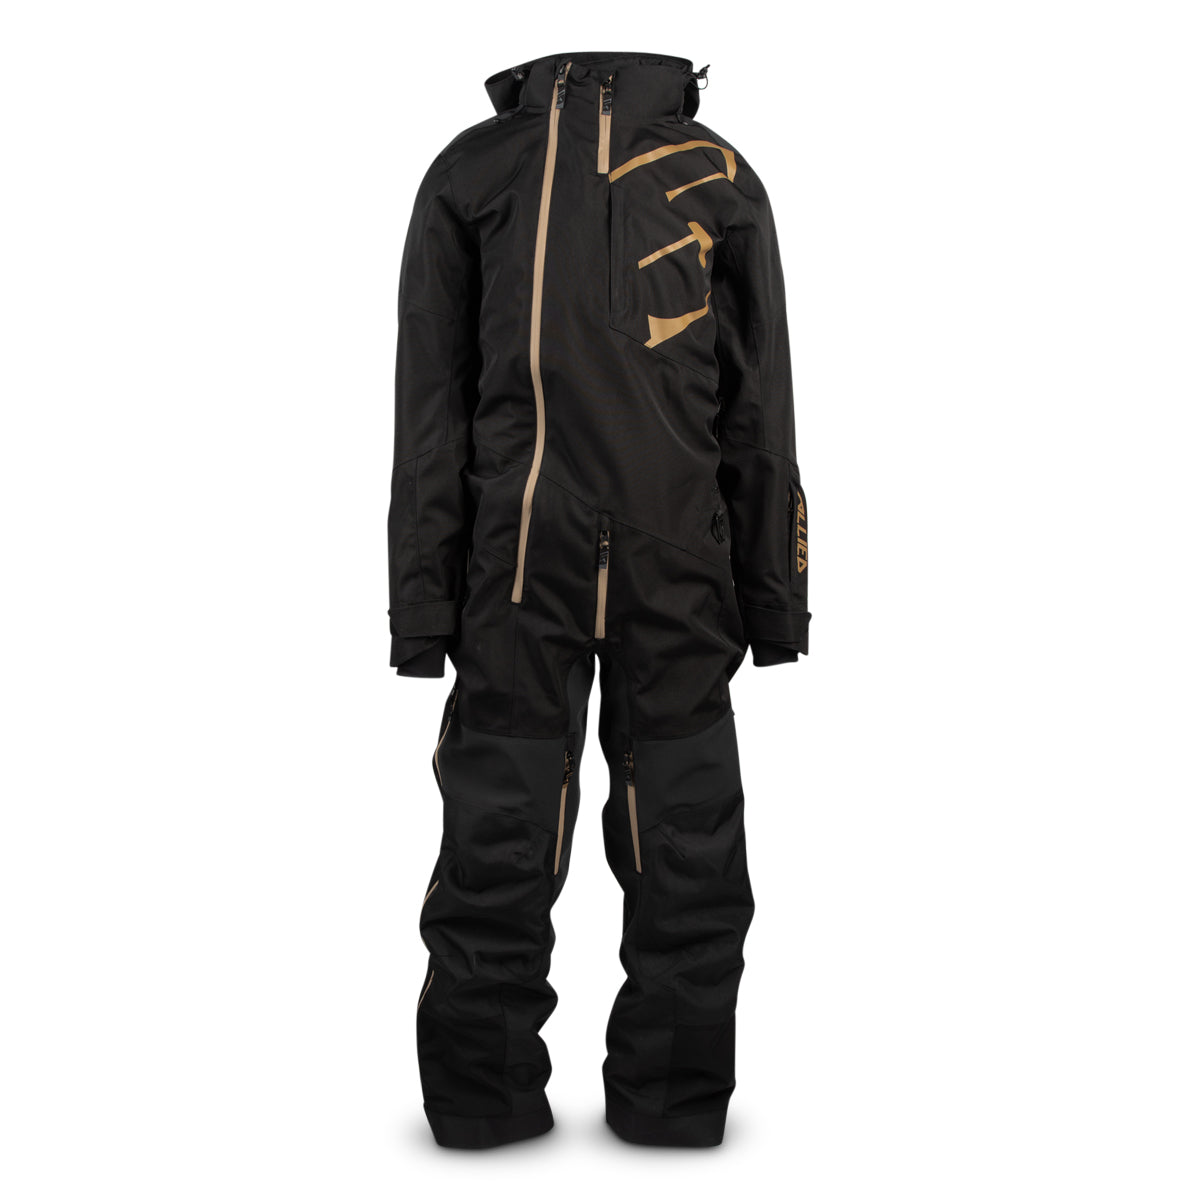 509 BLACK FRIDAY LIMITED EDITION BLACK GUM ALLIED INSULATED MONO SUIT